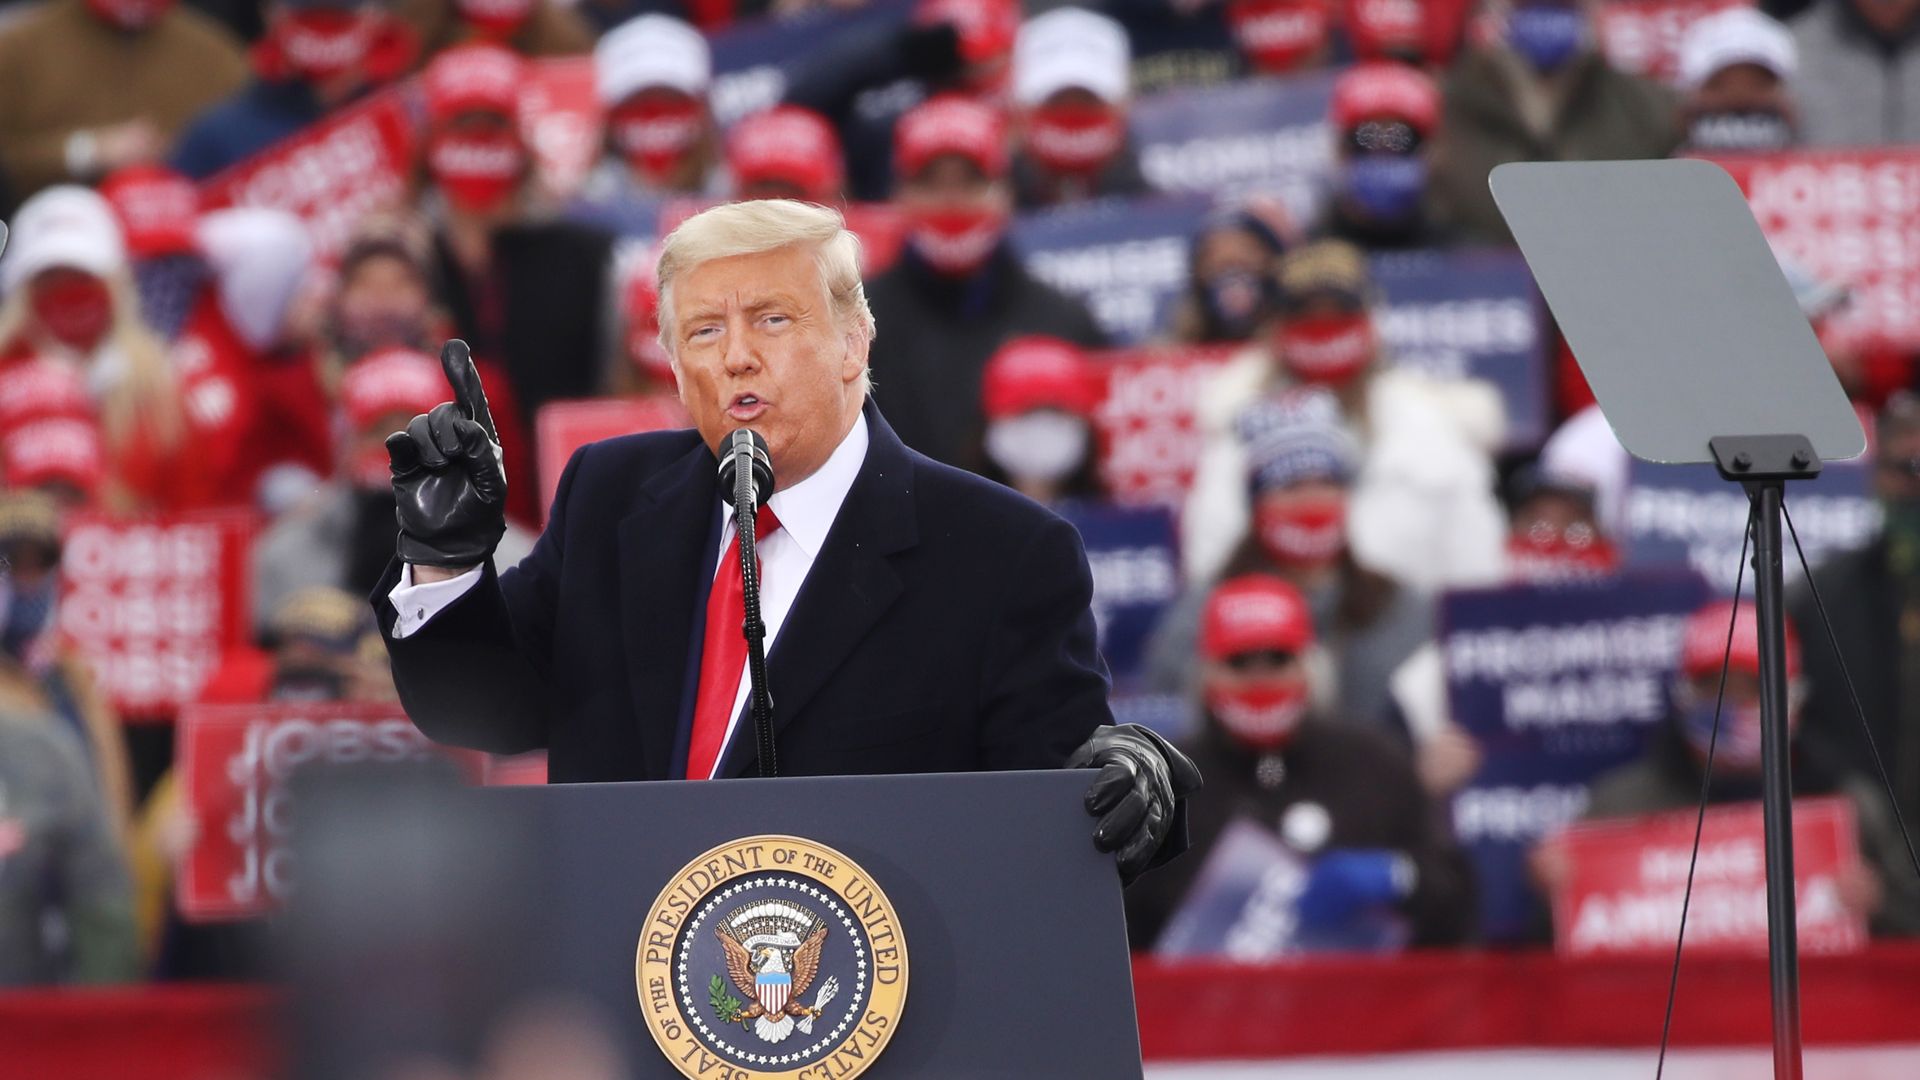 President Donald Trump speaks at a rally on October 31, 2020 in Reading, Pennsylvania. 